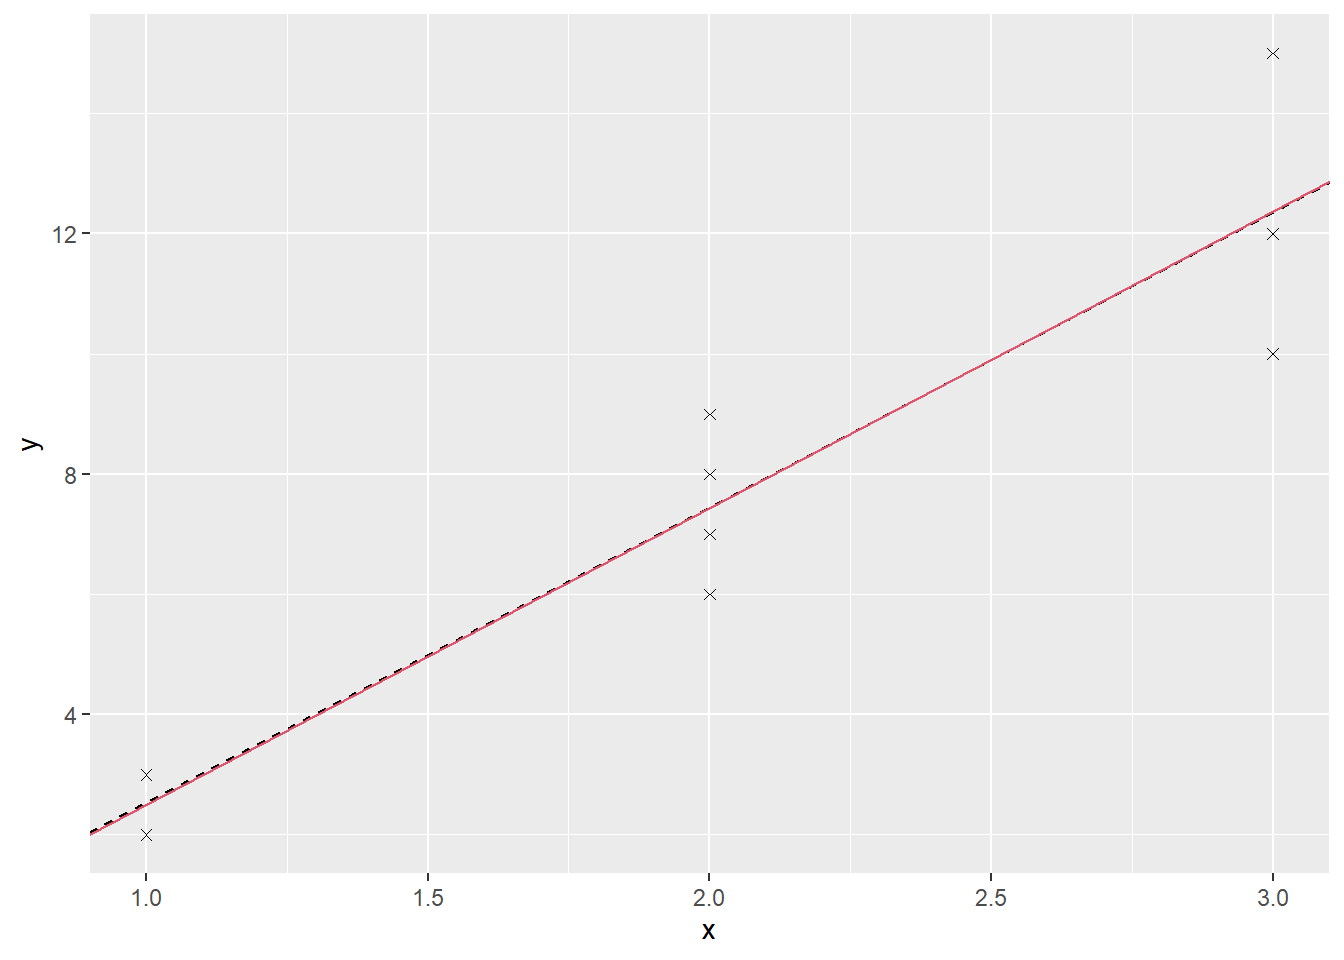 Fitted lines from the unweighted (black) and weighted (red) models for the Artificial data.